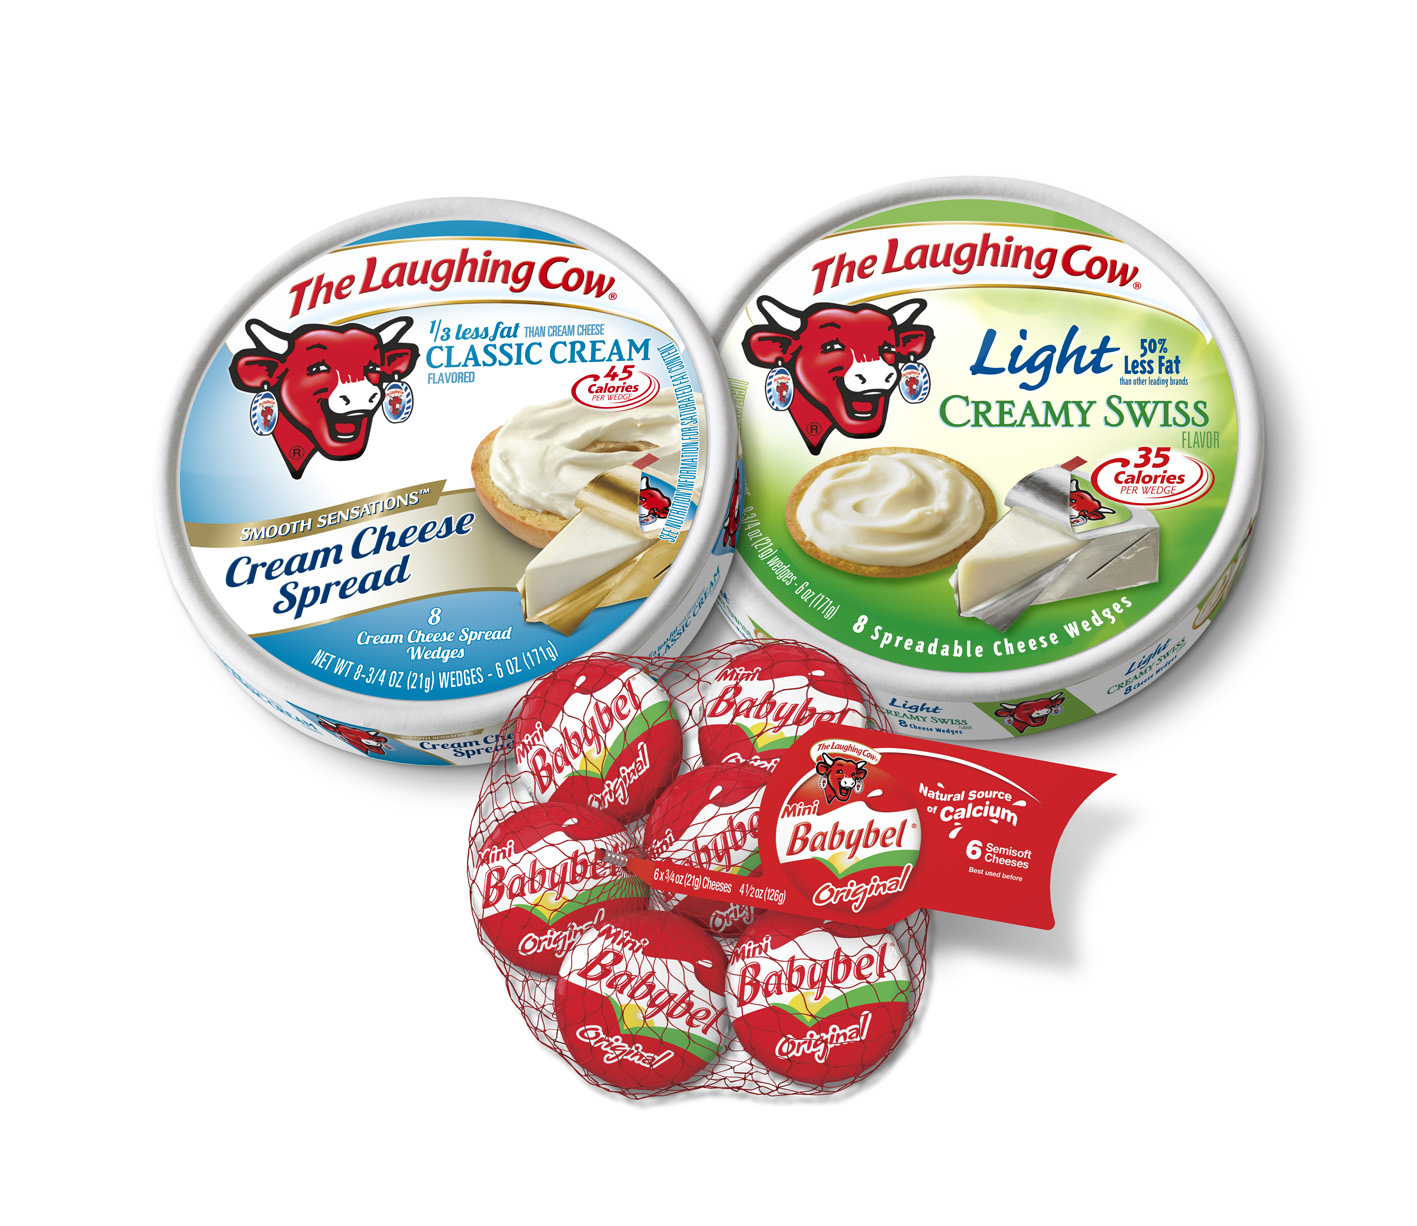 Bel Brands USA manufactures and markets The Laughing Cow and Mini Babybel - America's #1 branded snacking cheese.